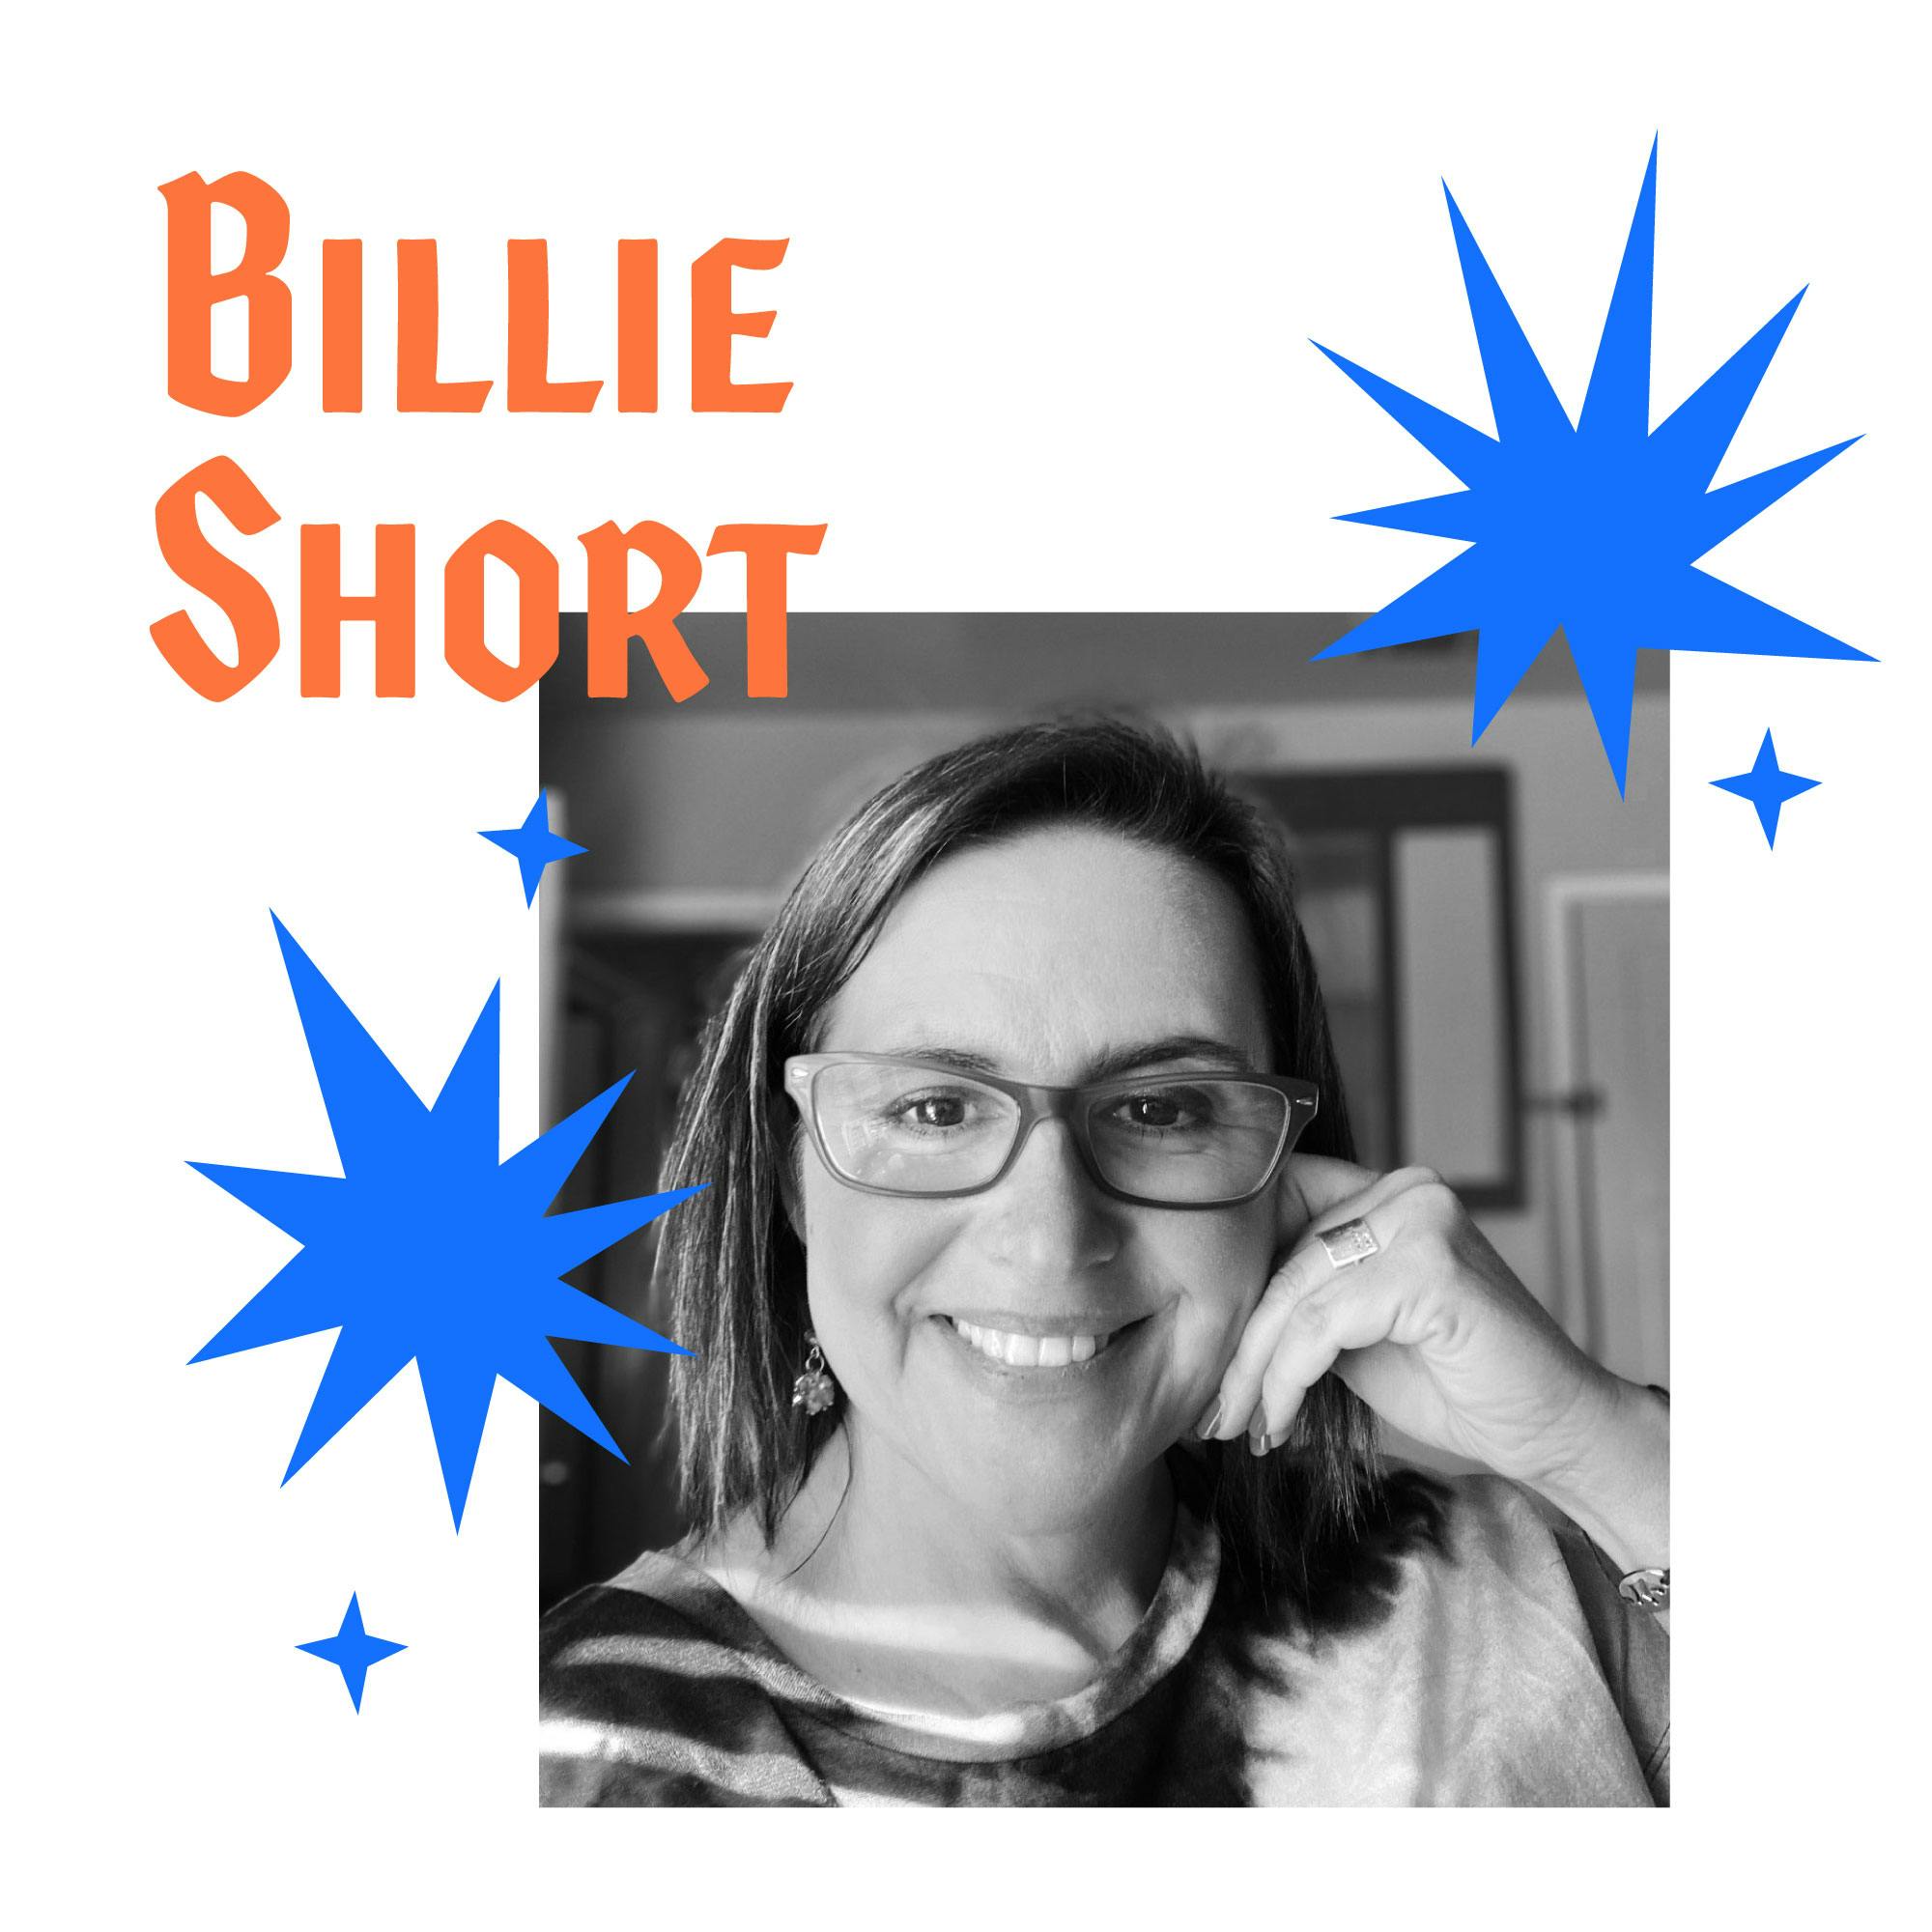 Finding Peace and New Energy to Dig Deeper After 18 Years Undiagnosed with Billie Short